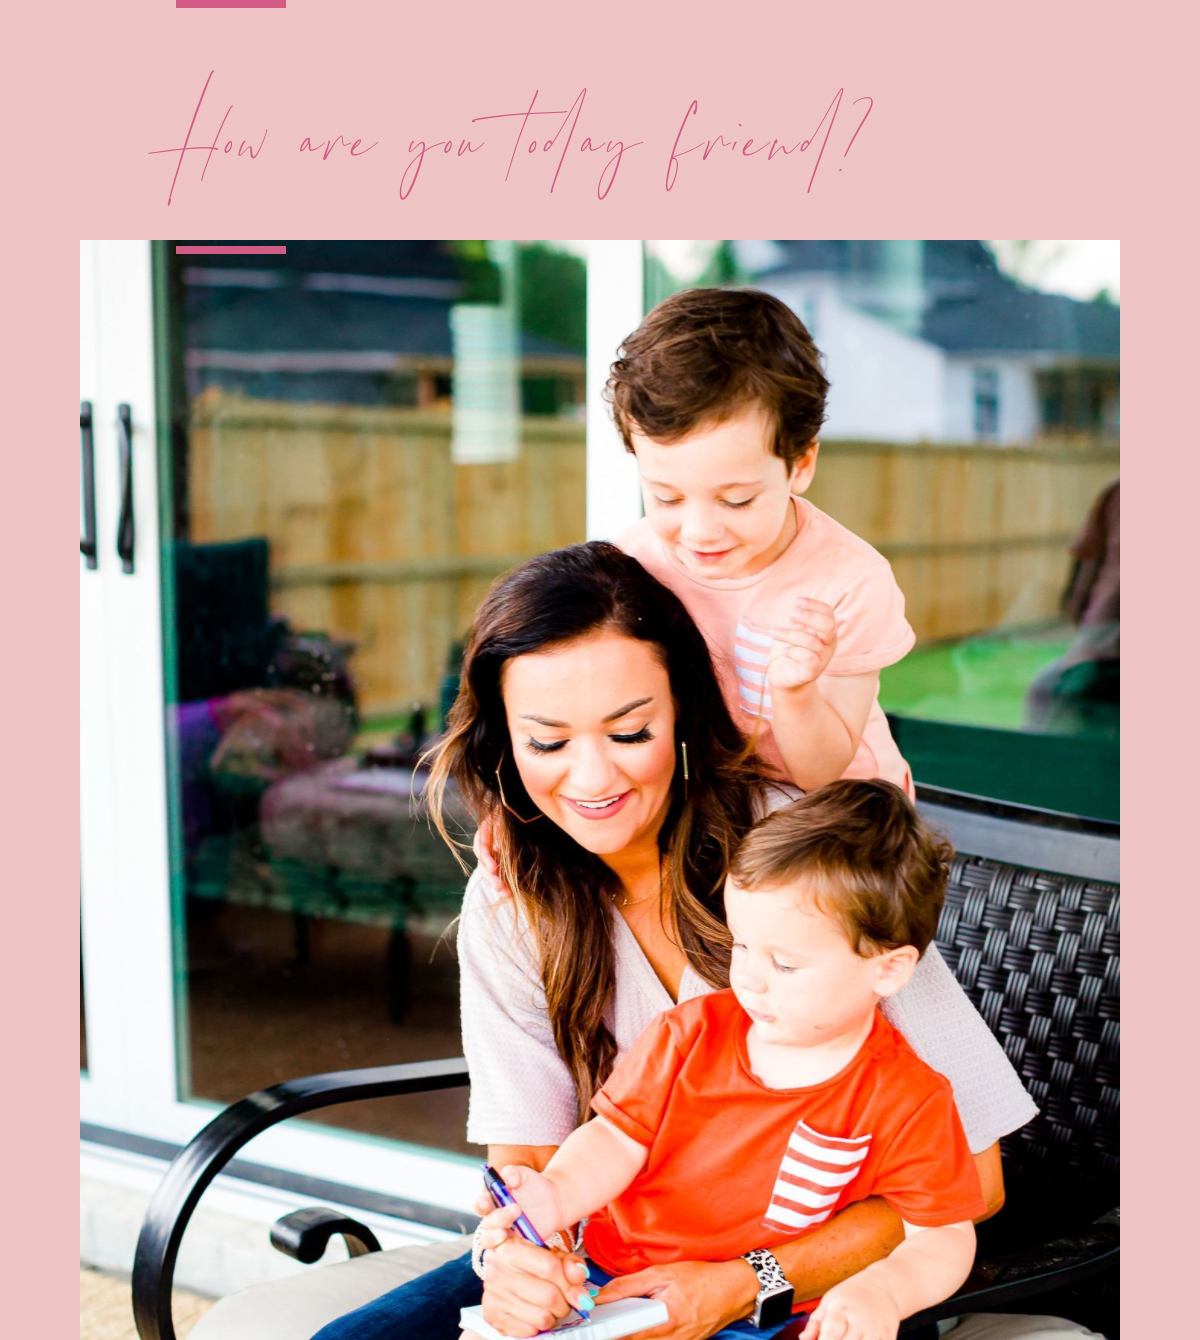 12 Valentines Day Memory Verses FREE Printable by Alabama faith + family blogger, Heather Brown // My Life Well Loved